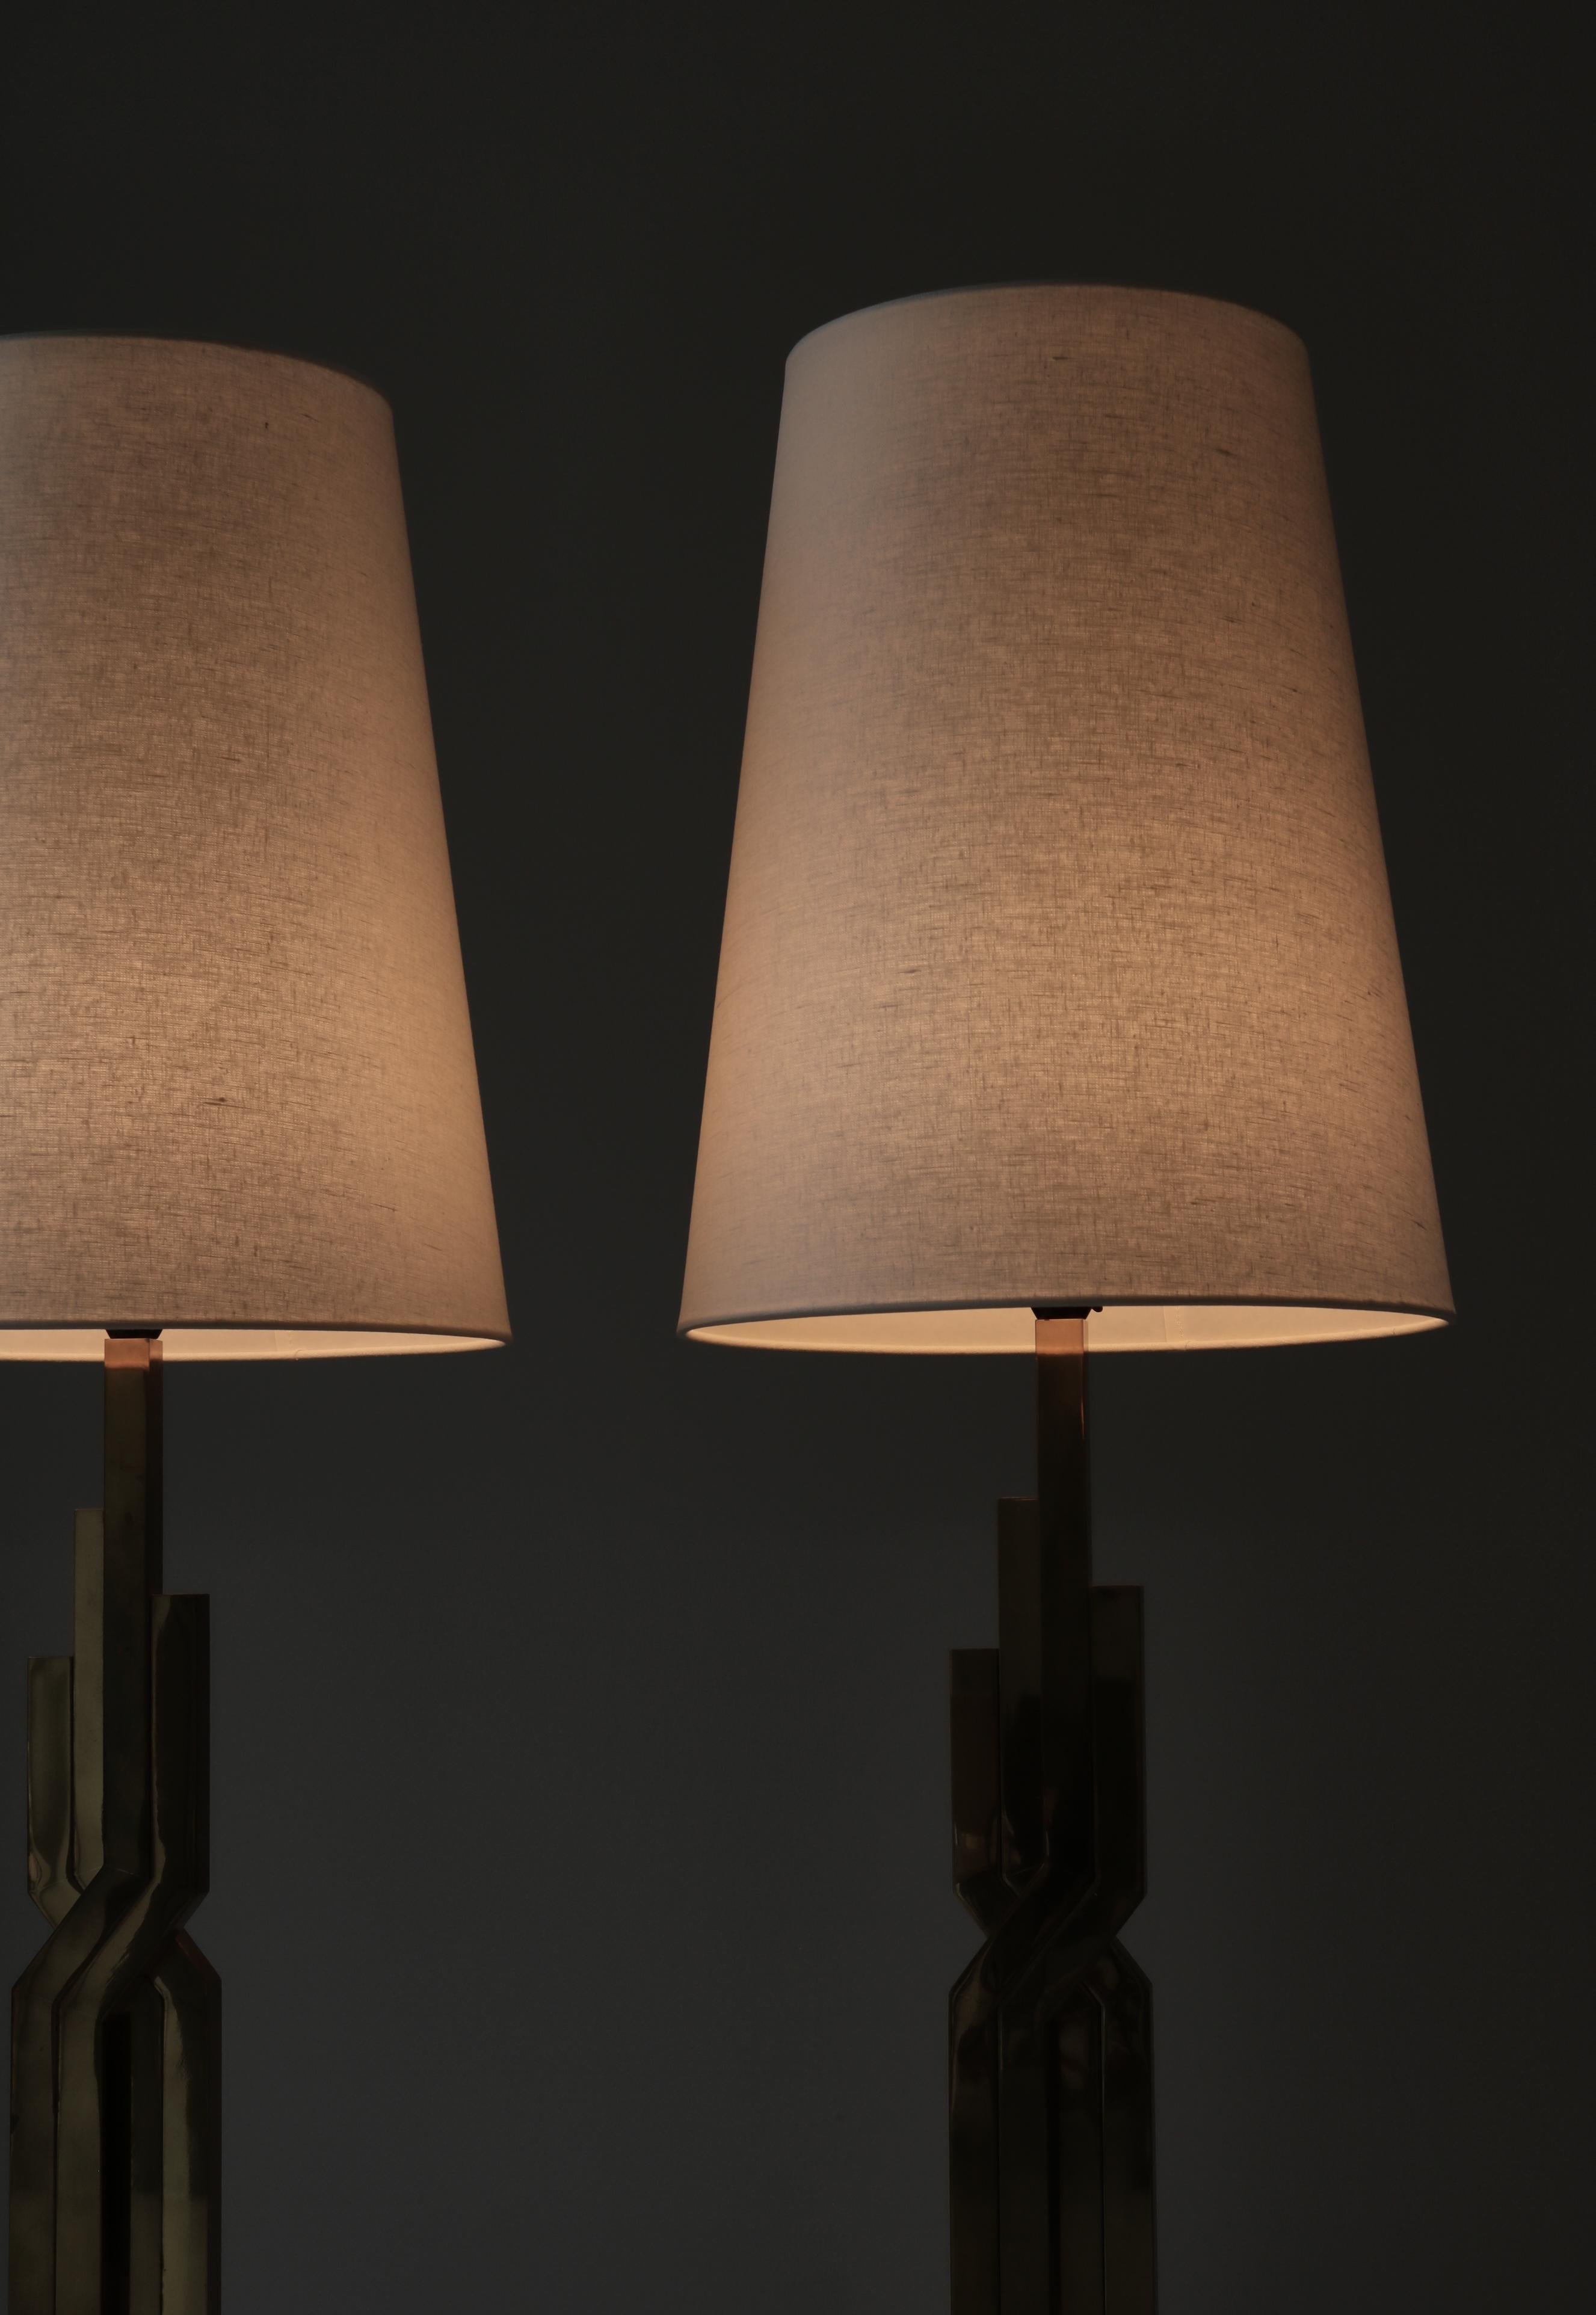 Large Danish Modern Table Lamps in Brass by Svend Aage Holm-Sørensen, 1960s For Sale 9